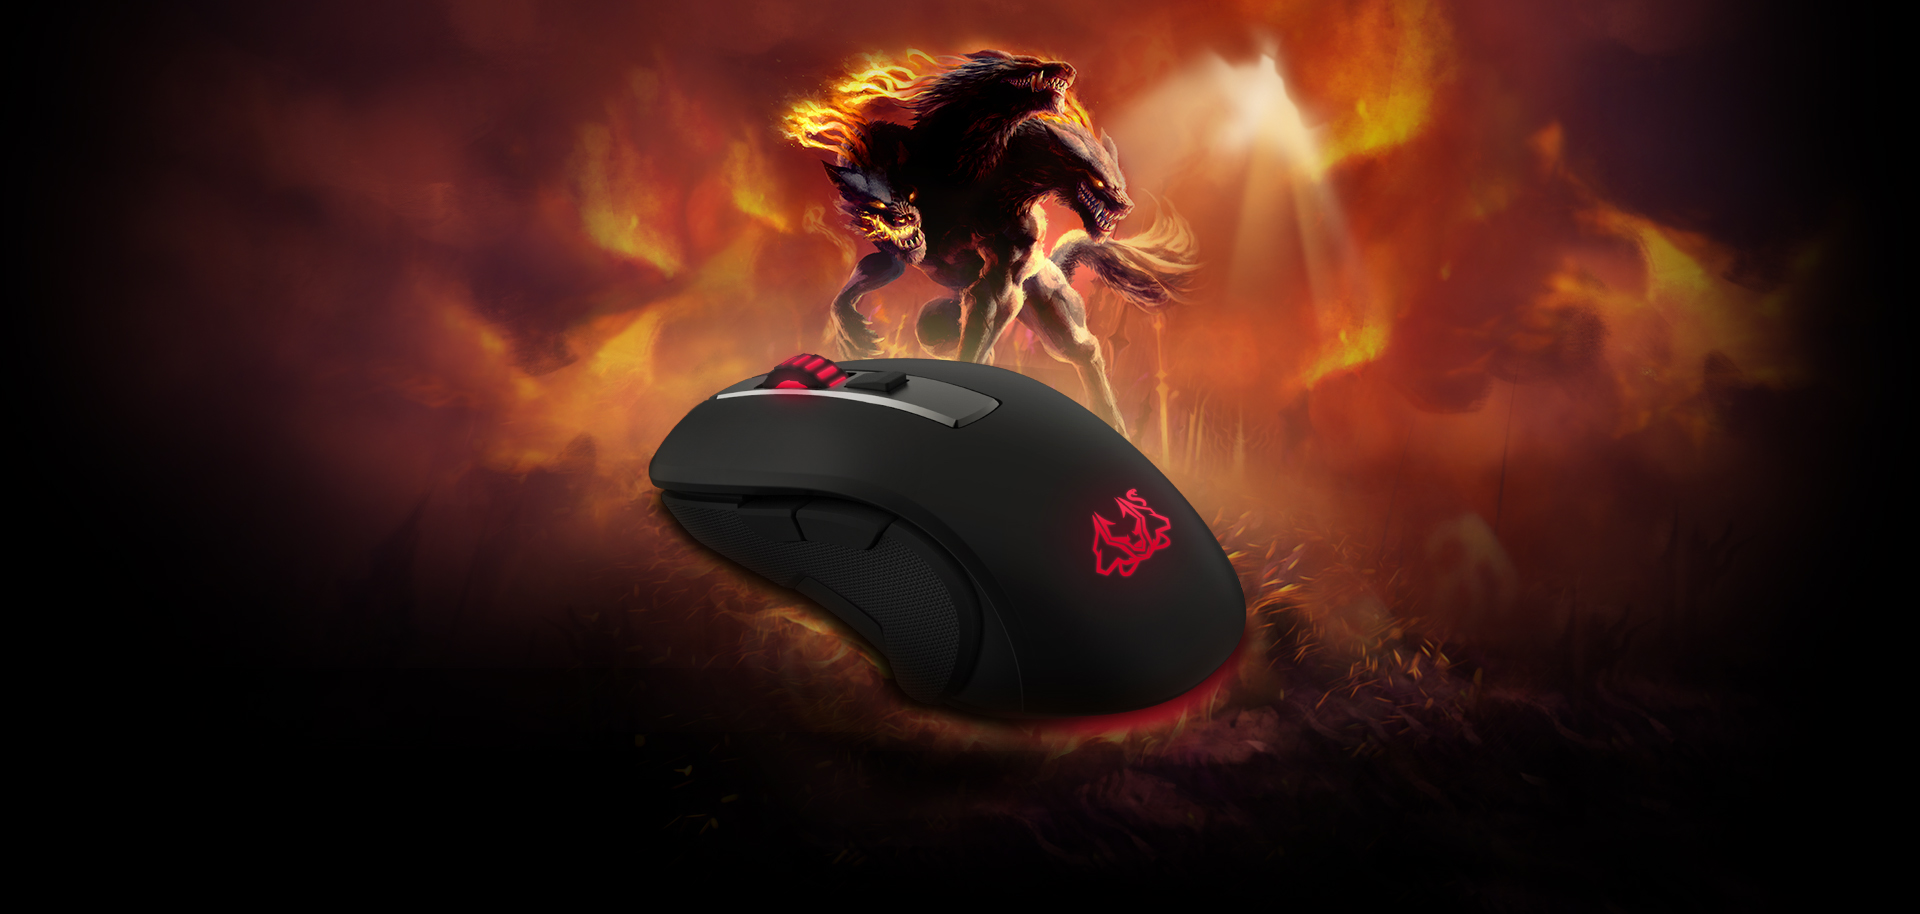 Cerberus Fortus Mice And Mouse Pads Asus Global